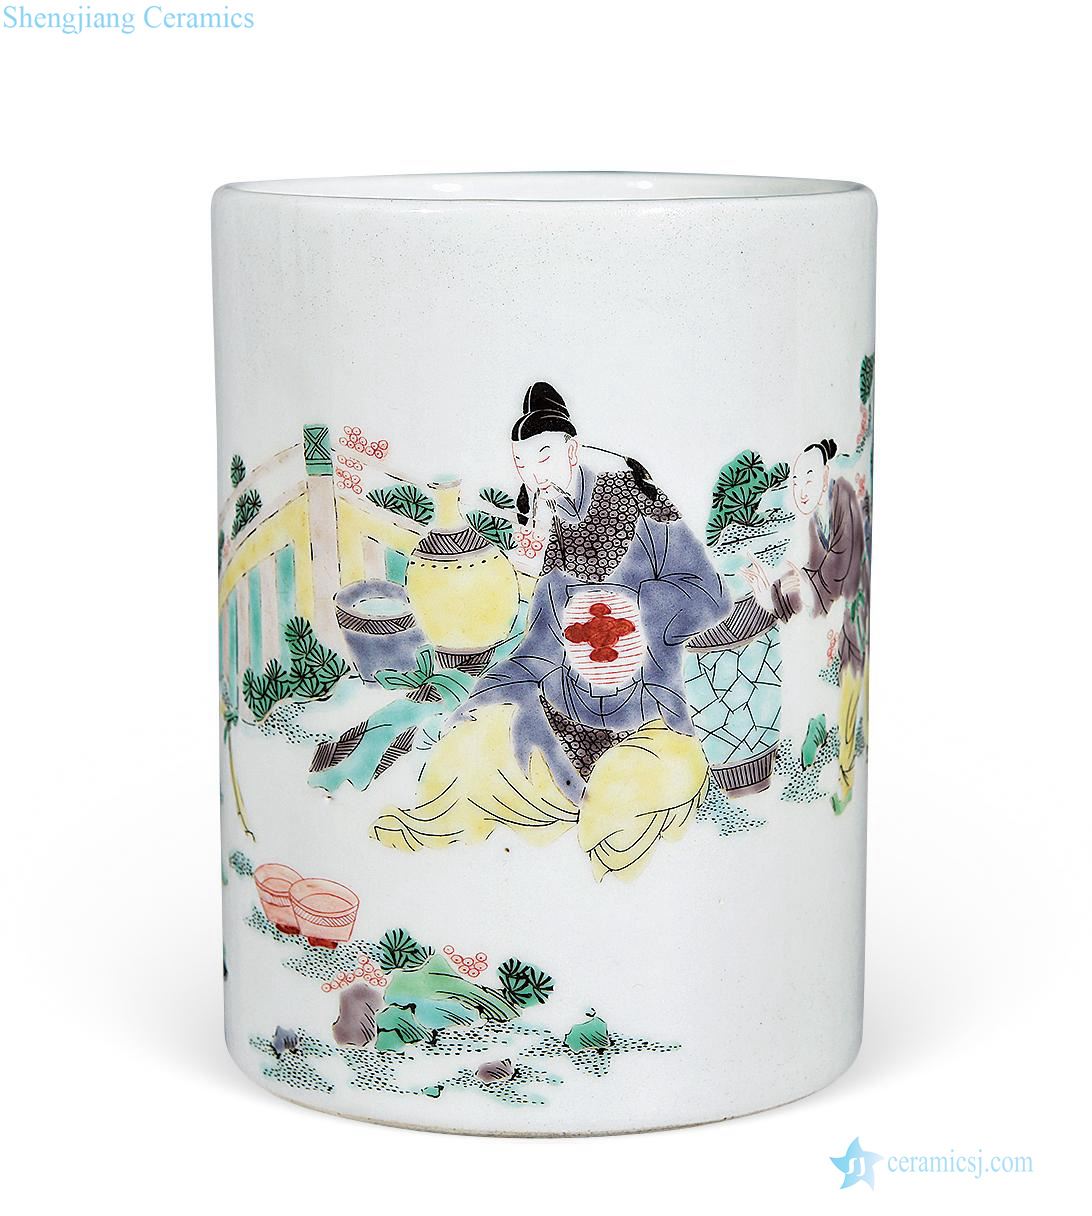 Qing guangxu Colorful characters pen container